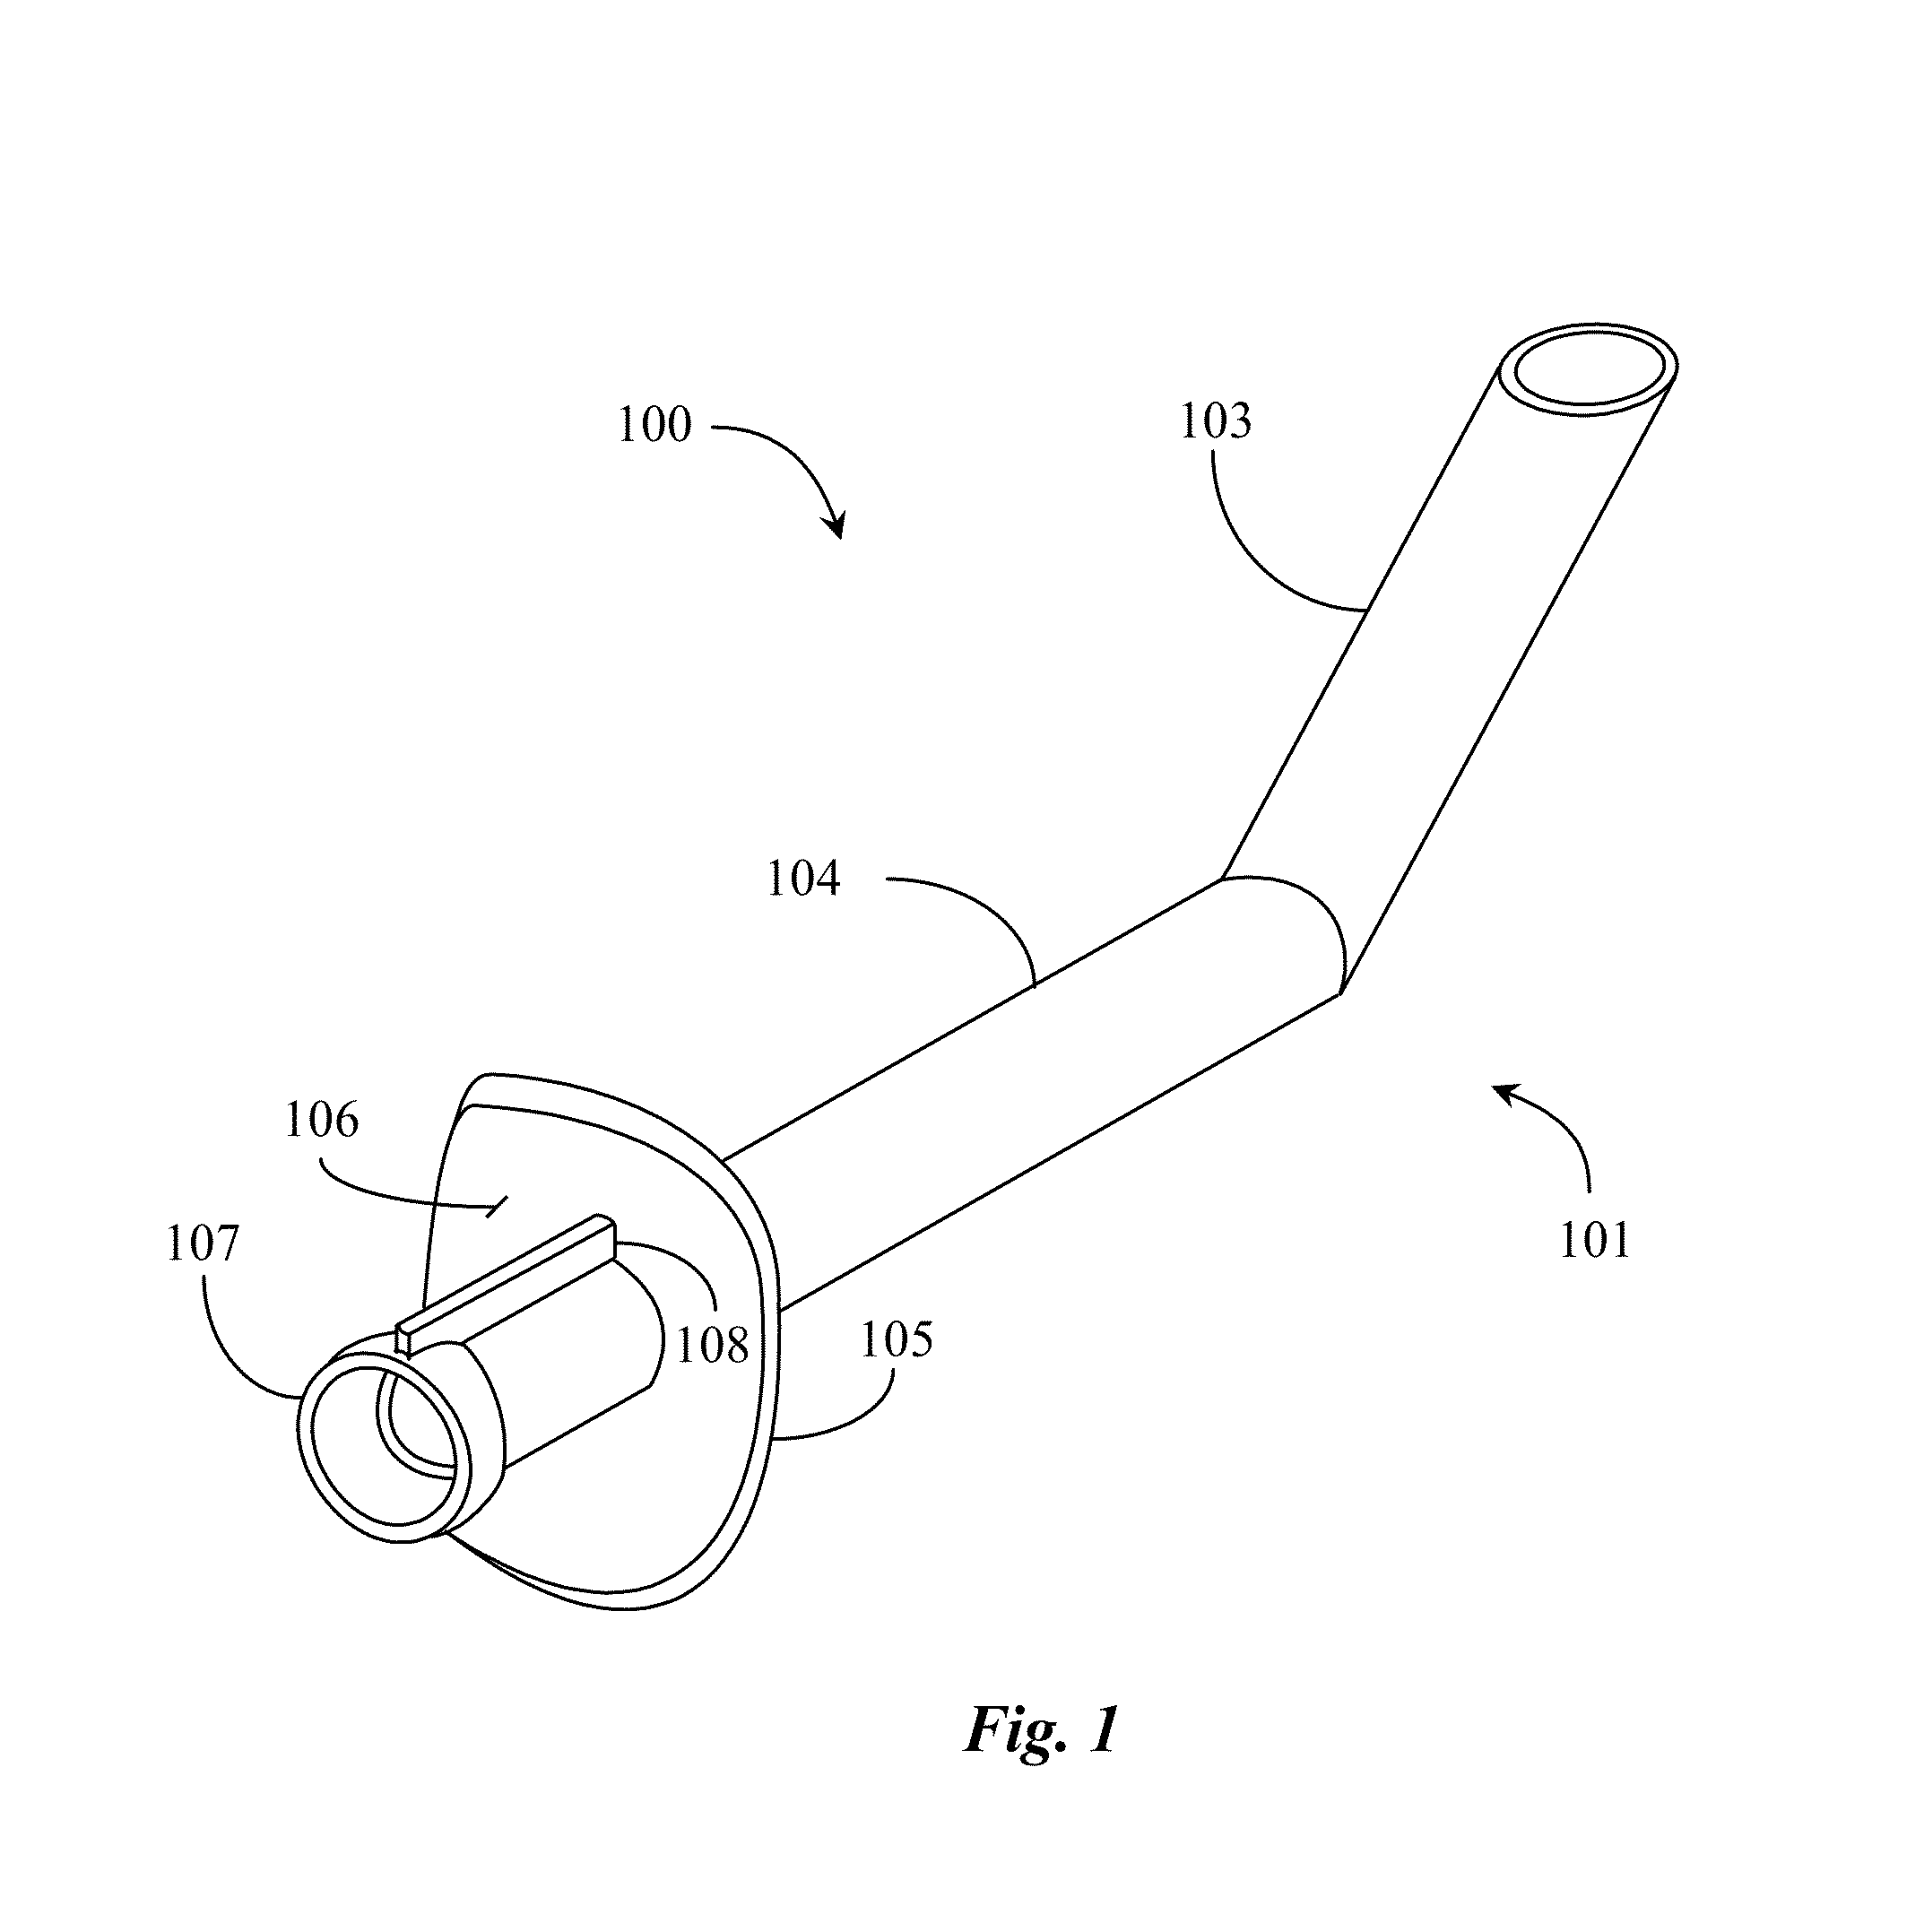 Garments for Use with Urinary Device